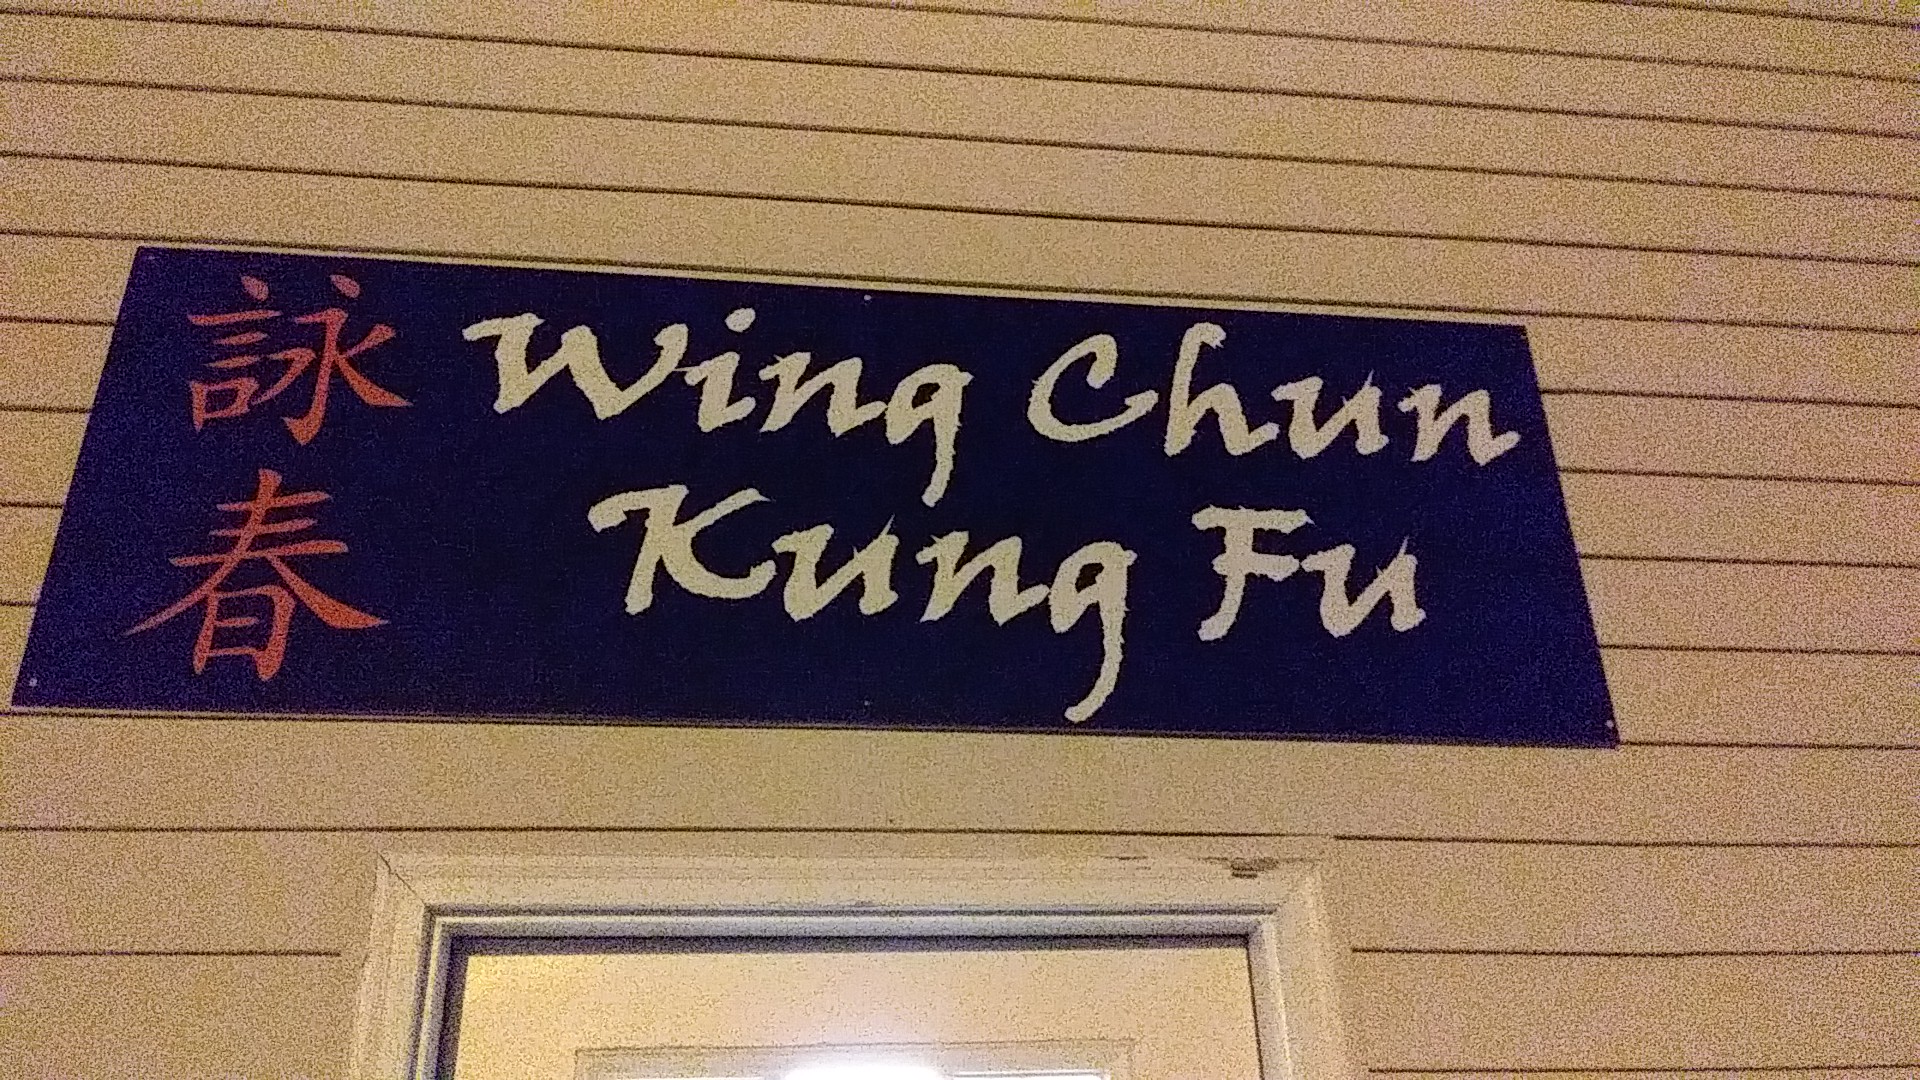 West County Wing Chun 298-R, Vance Rd, Valley Park Missouri 63088